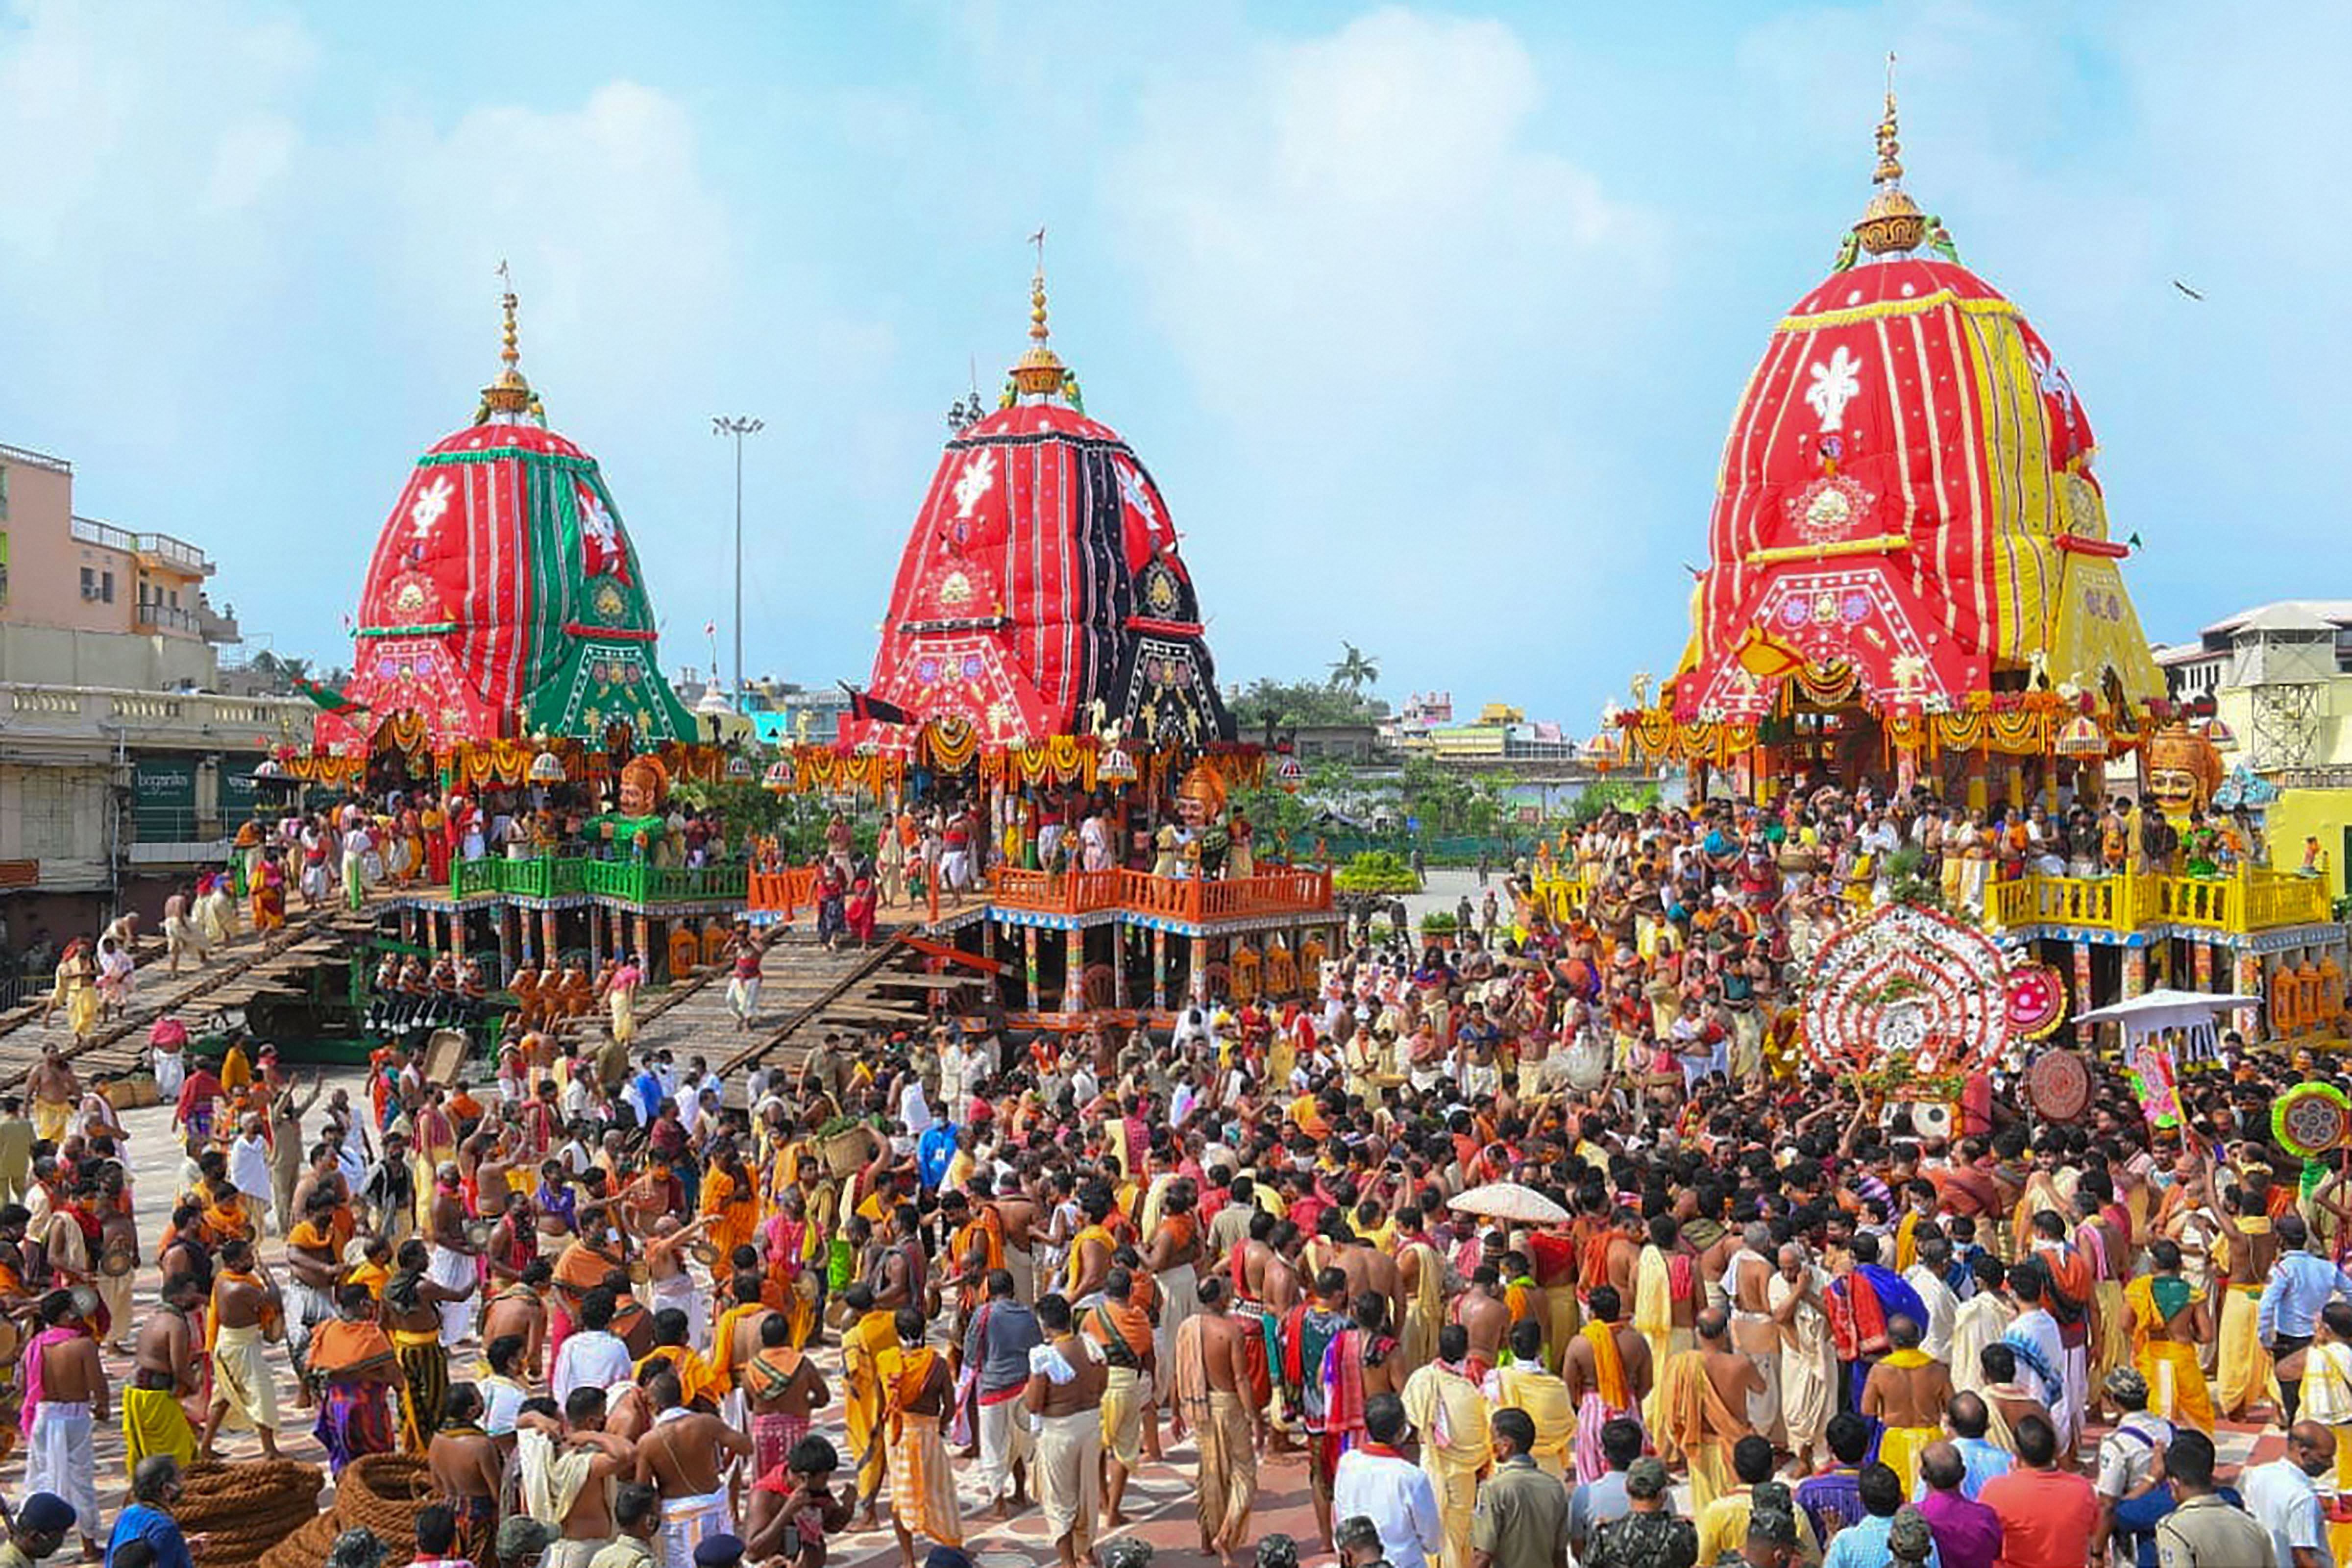 Priests and devotees take part in the 'pahandi' rituals of Lord Jagannath Rath Yatra in Puri, Tuesday, June 23, 2020. The Rath Yatra is being organised in a restricted manner this year due to the COVID-19 pandemic. (PTI Photo)